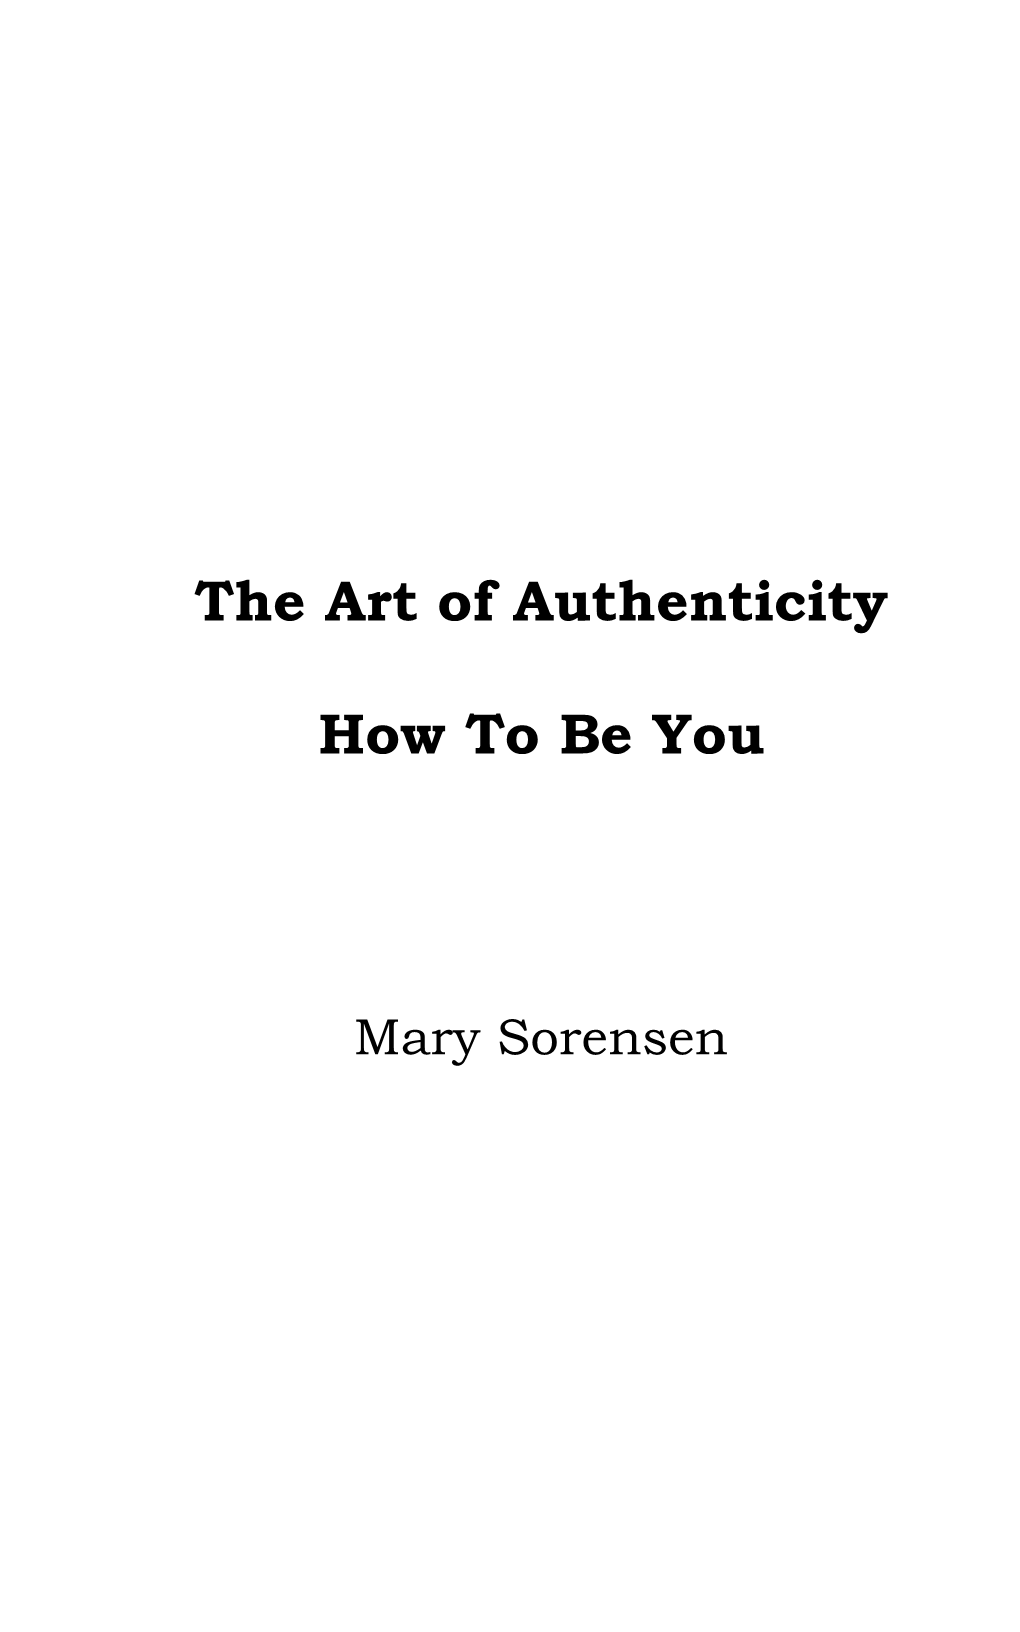 The Art of Authenticity How to Be